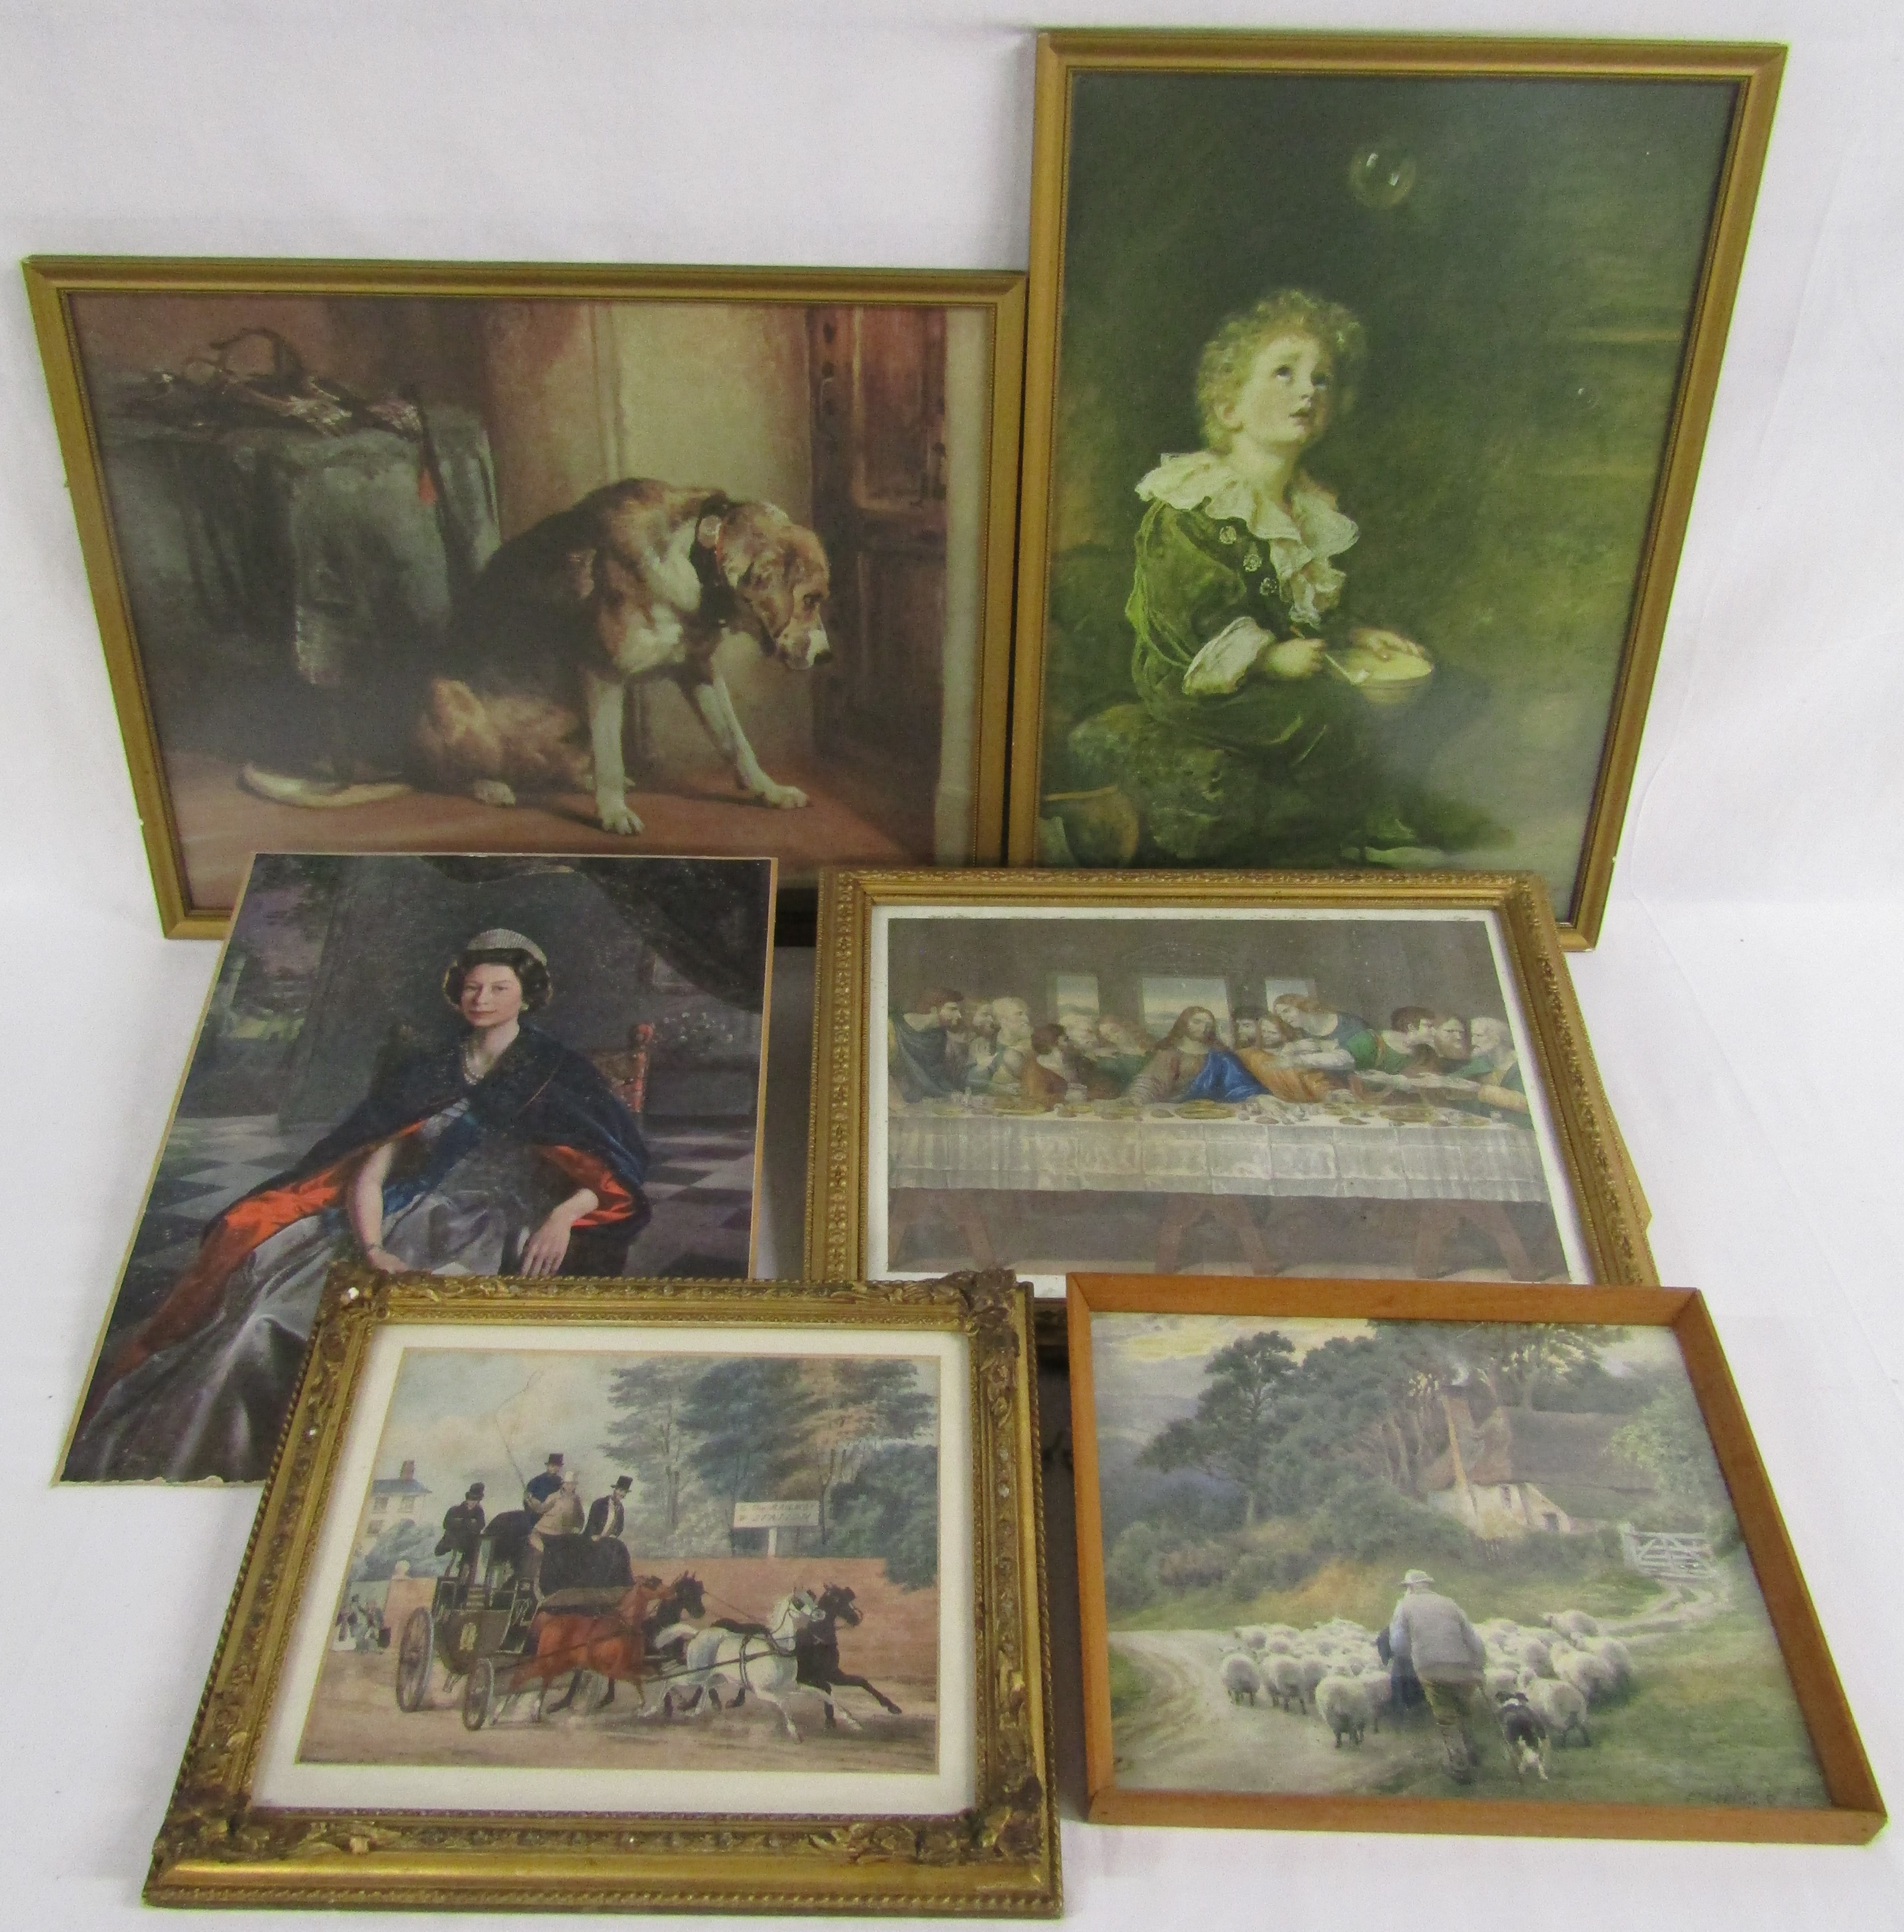 Framed prints includes The Last Supper, To the Railway Station, Bubbles Pears print, Victorian dog